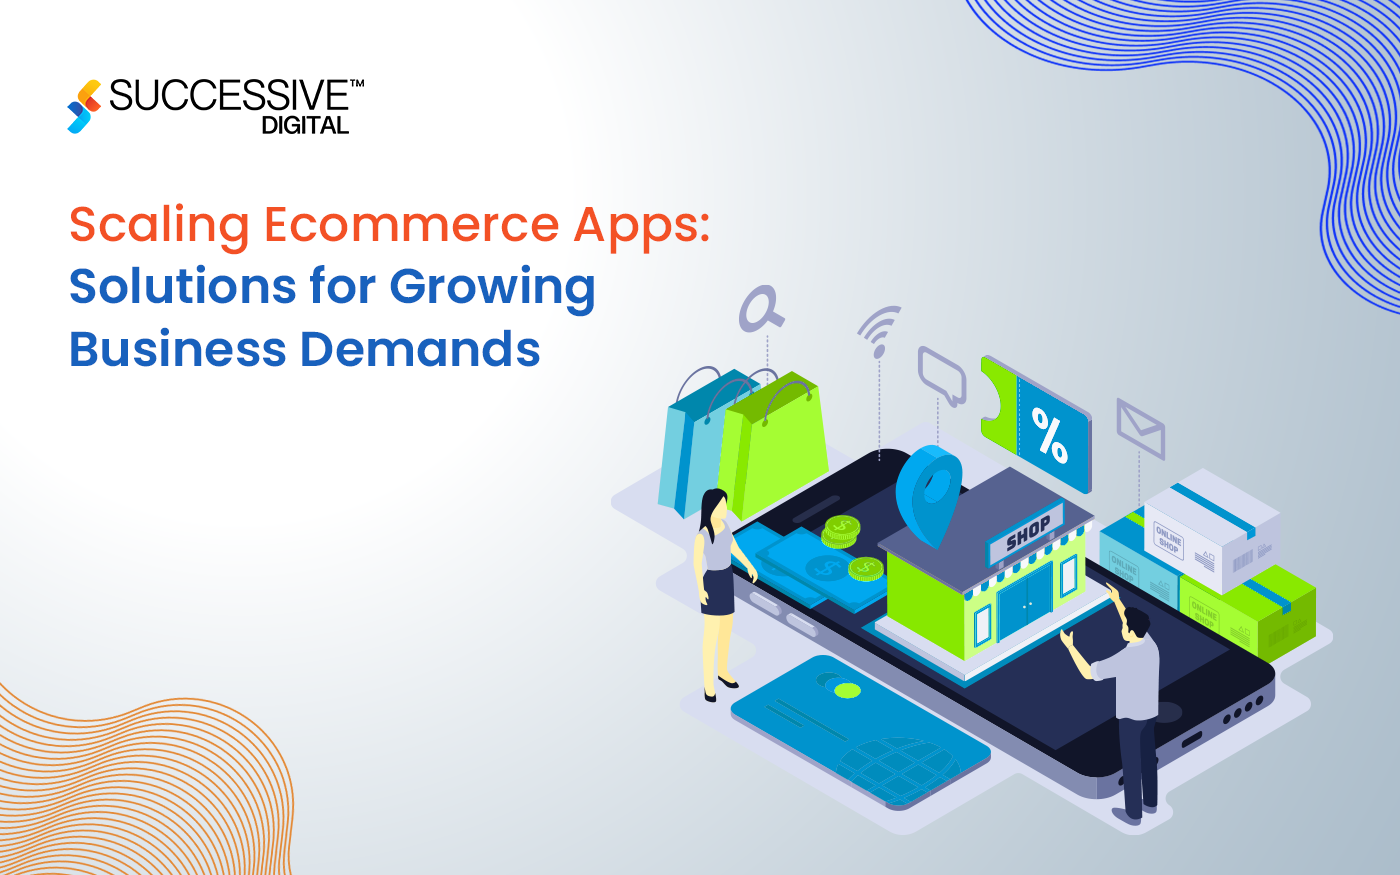 Scaling Ecommerce Apps: Solutions for Growing Business Demands